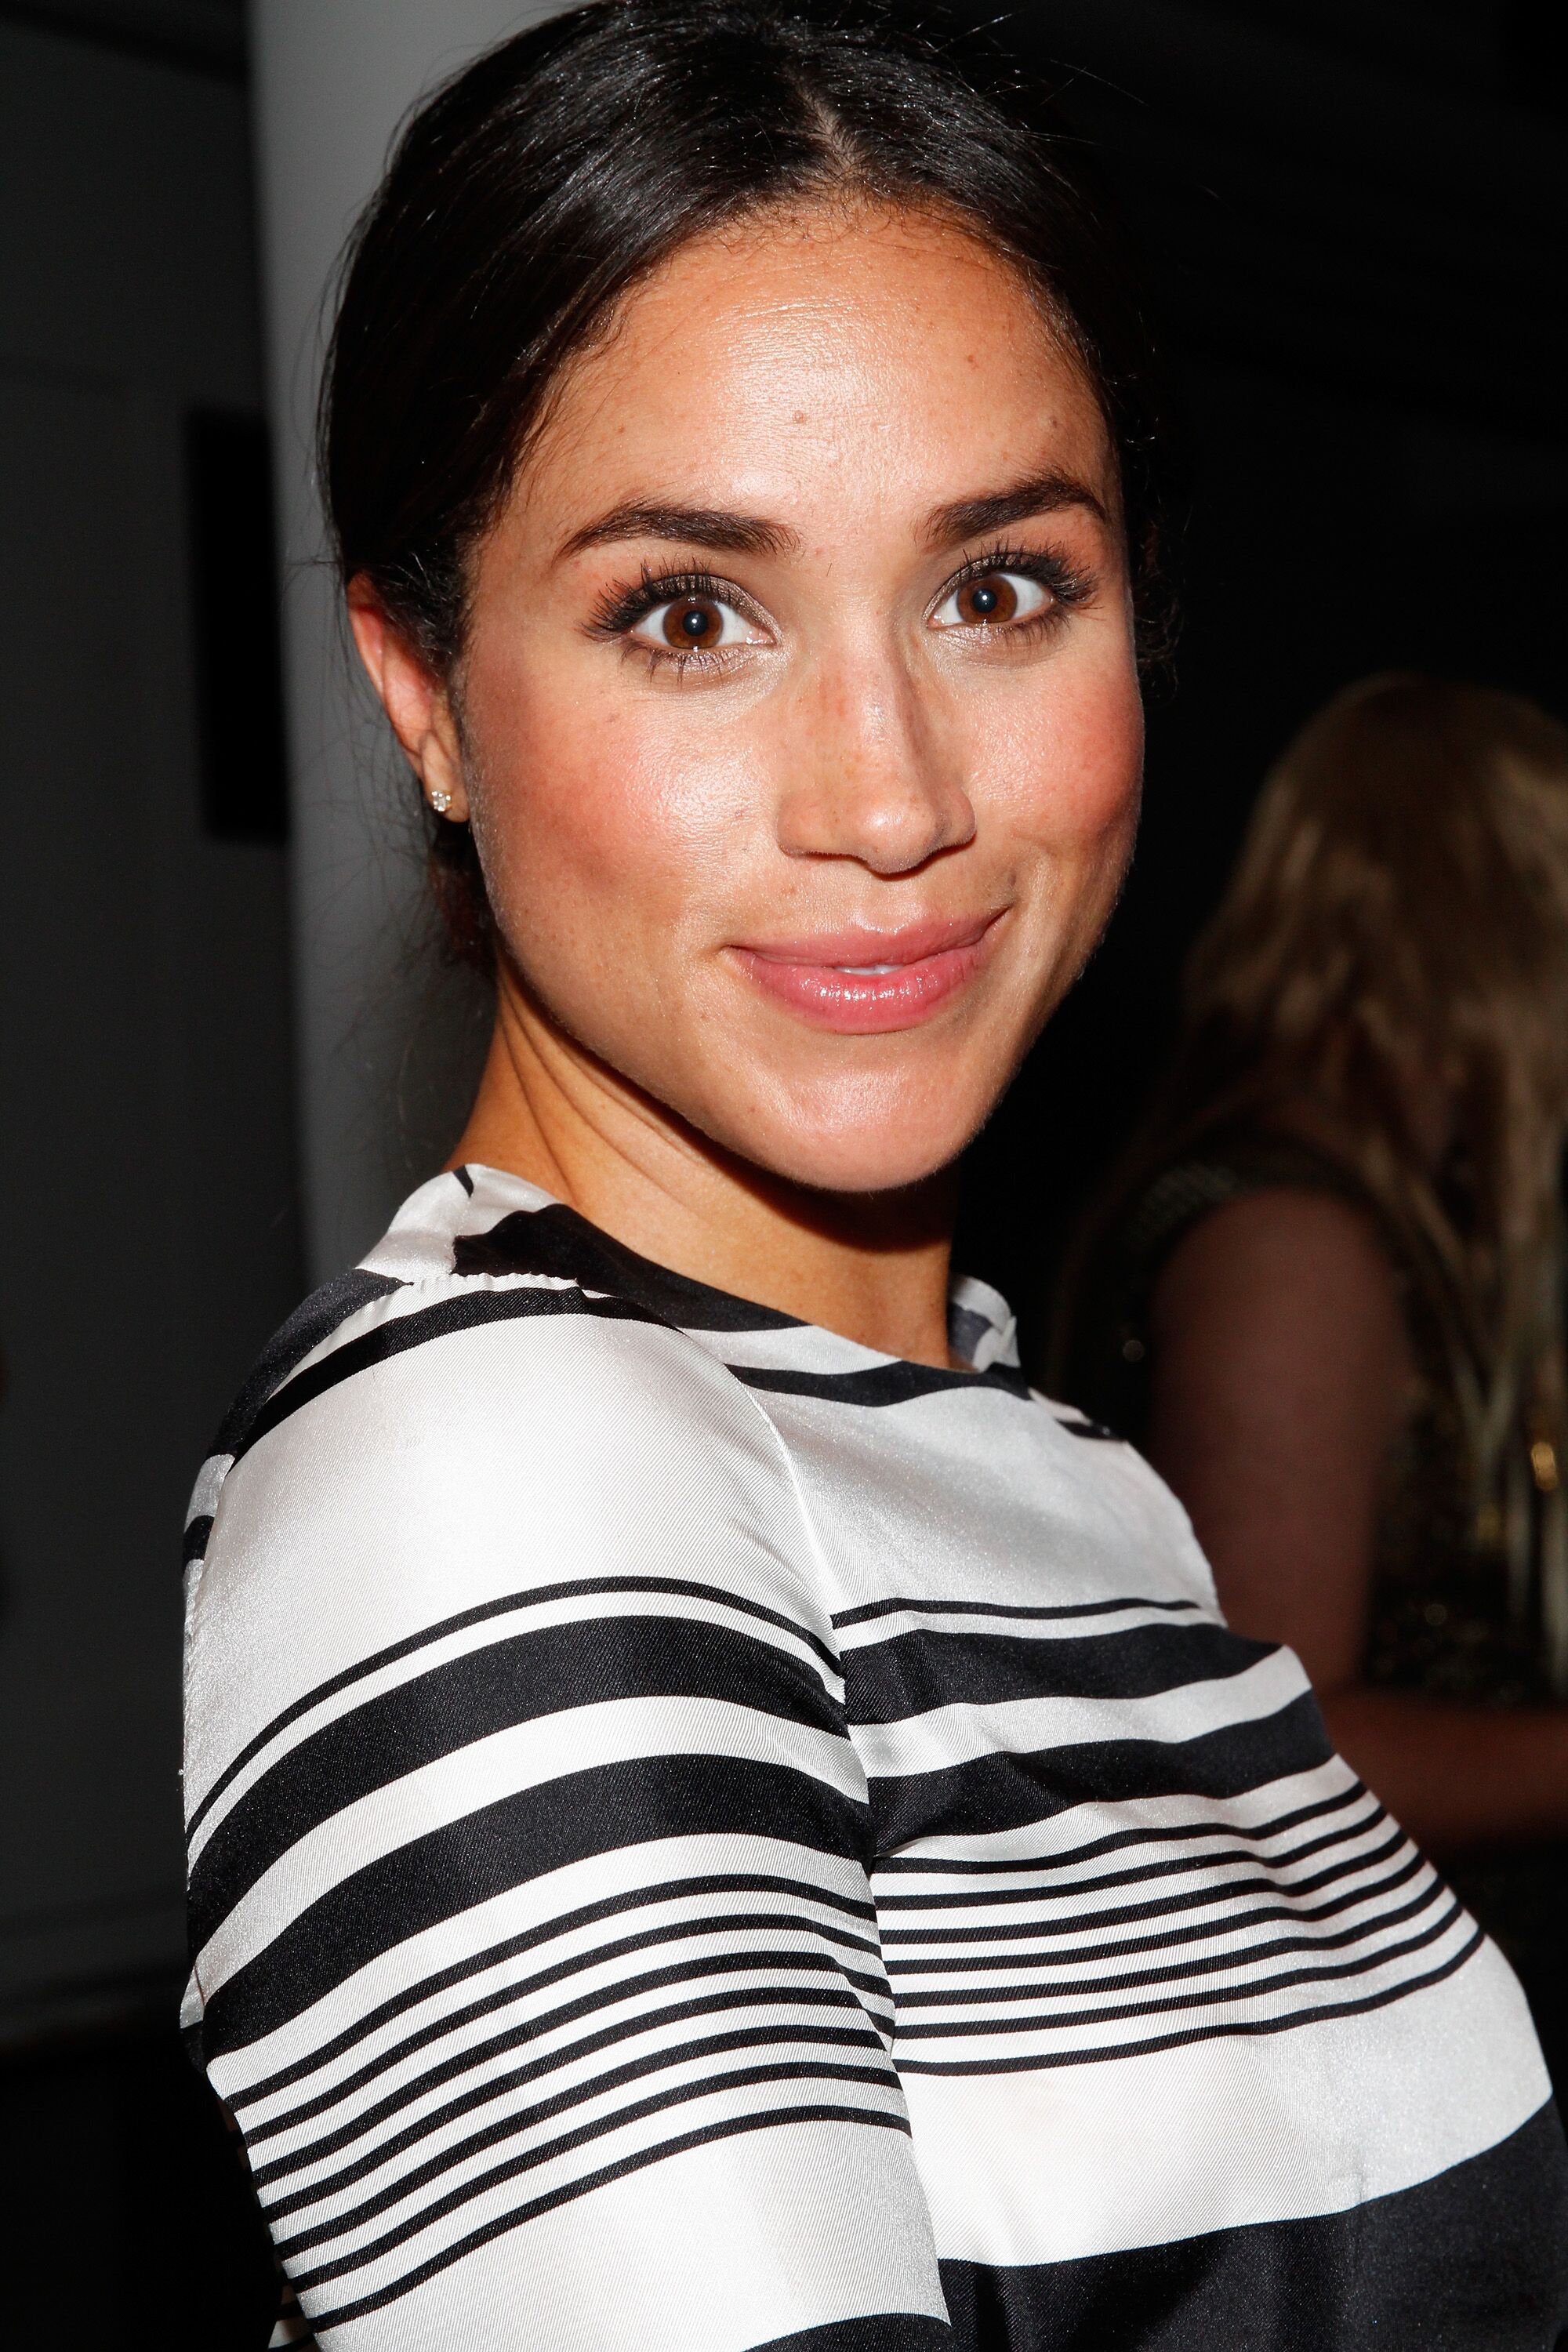 Model Meghan Markle attends the Peter Som fashion show during Mercedes-Benz Fashion Week Spring 2015 | Photo: Getty Images